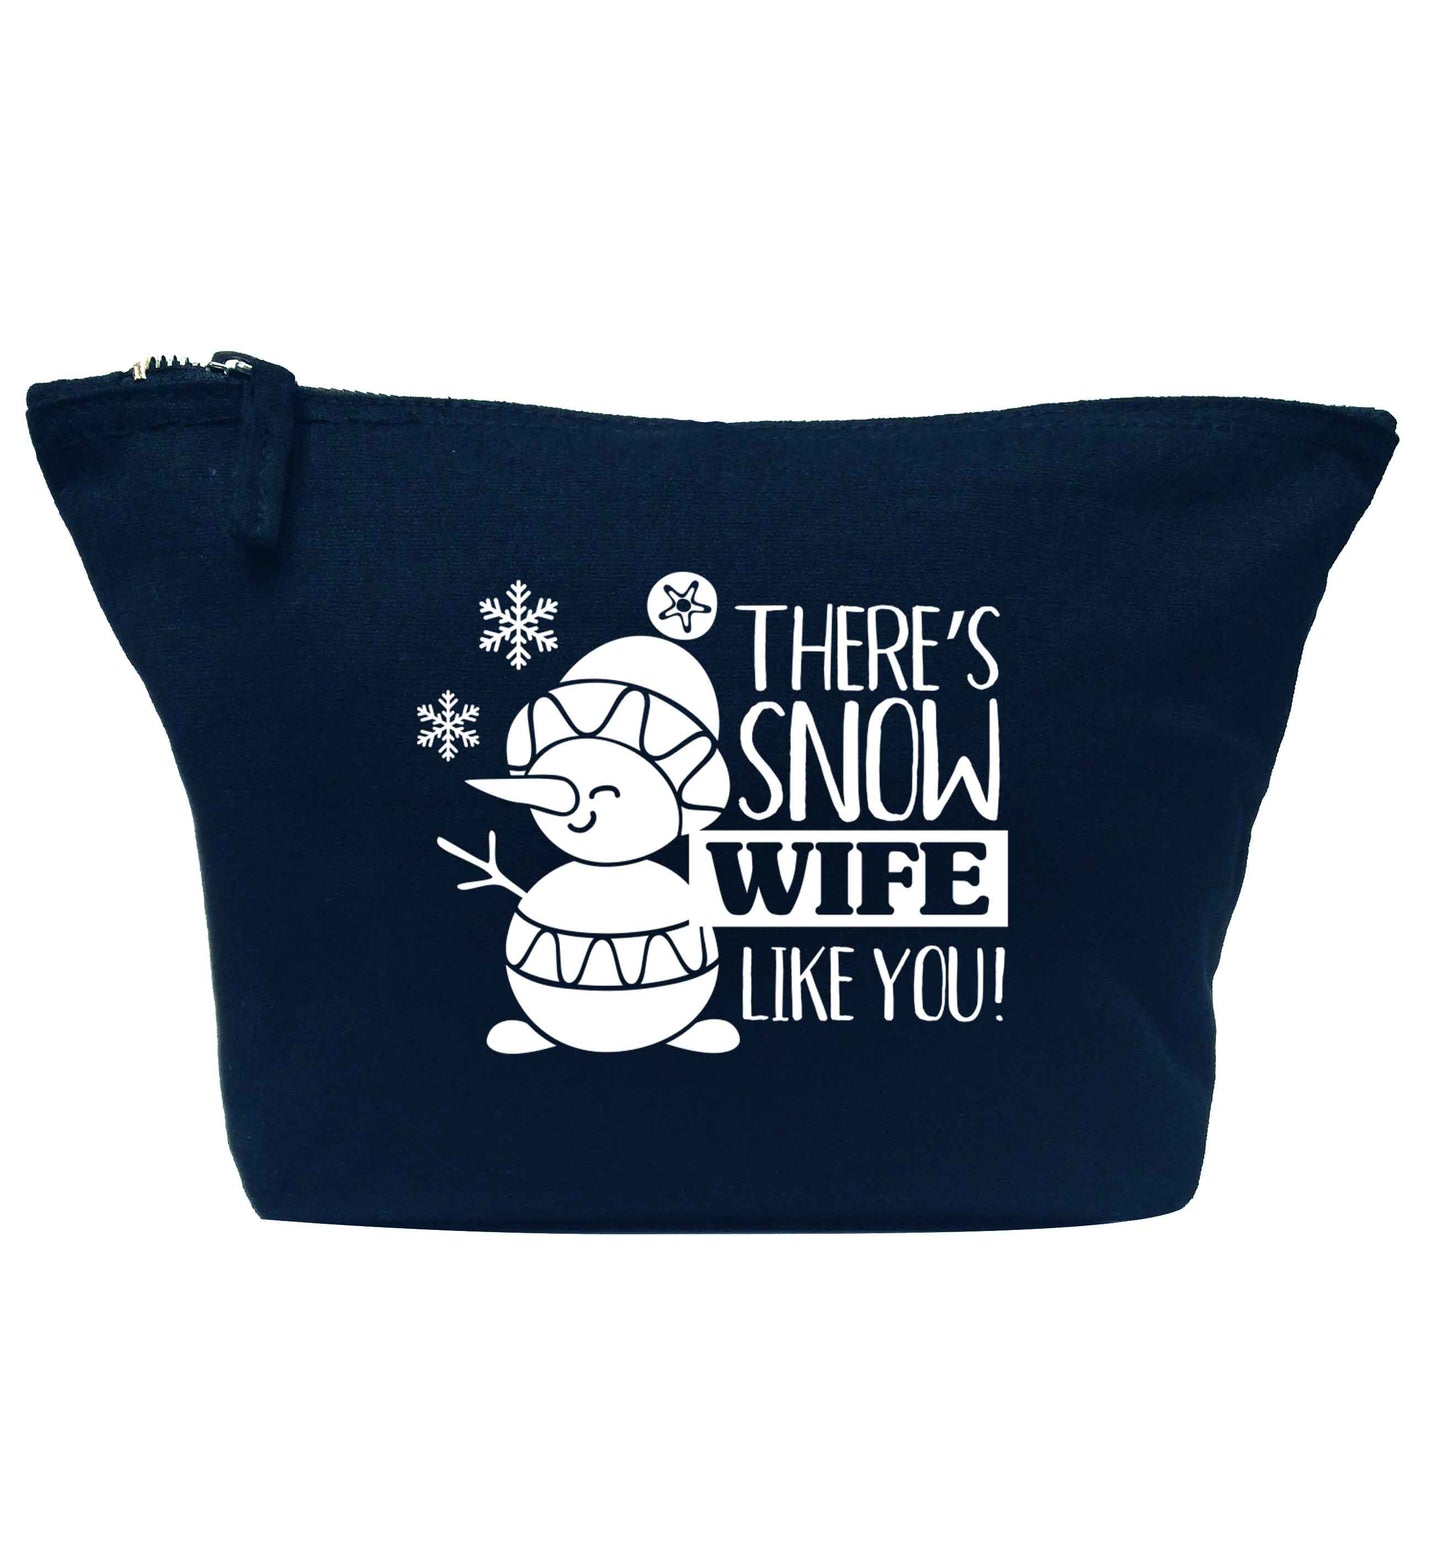 There's snow wife like you navy makeup bag